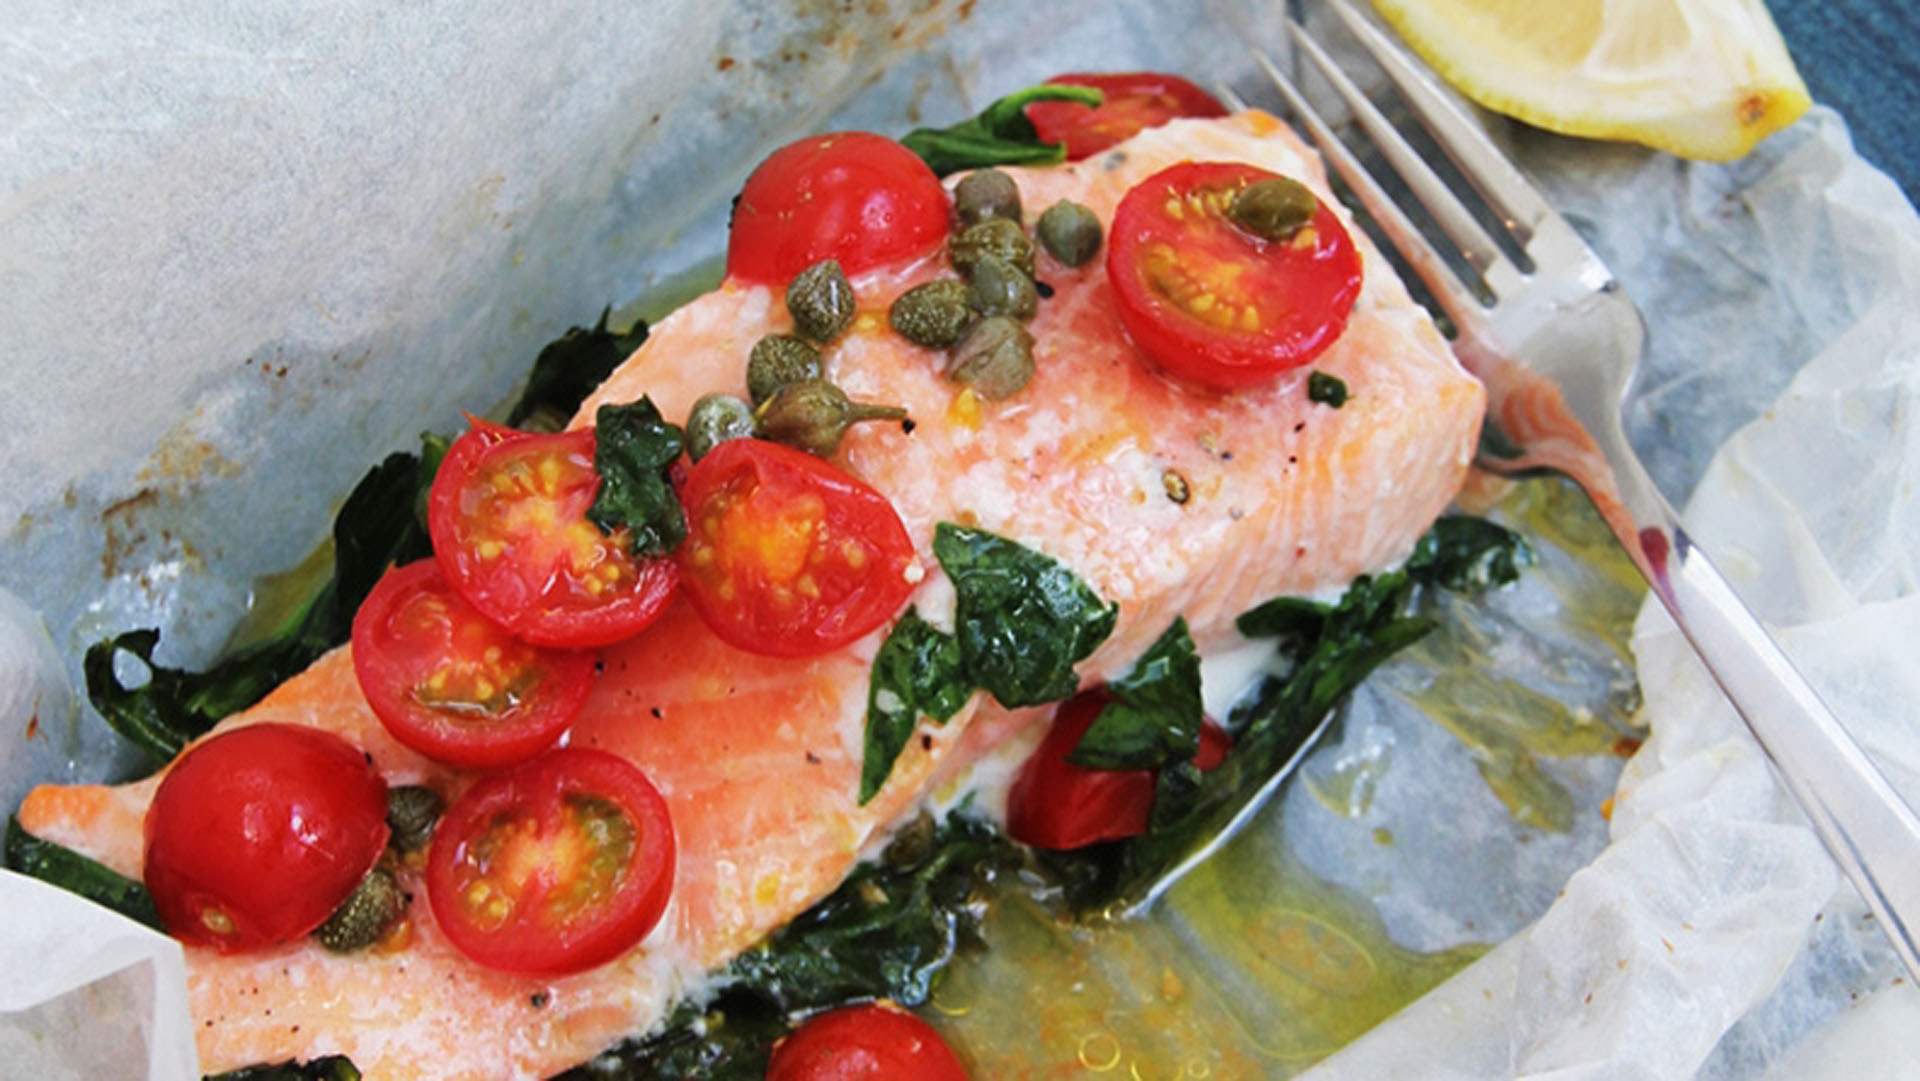 Healthy ideas for lunch: fish in a bag